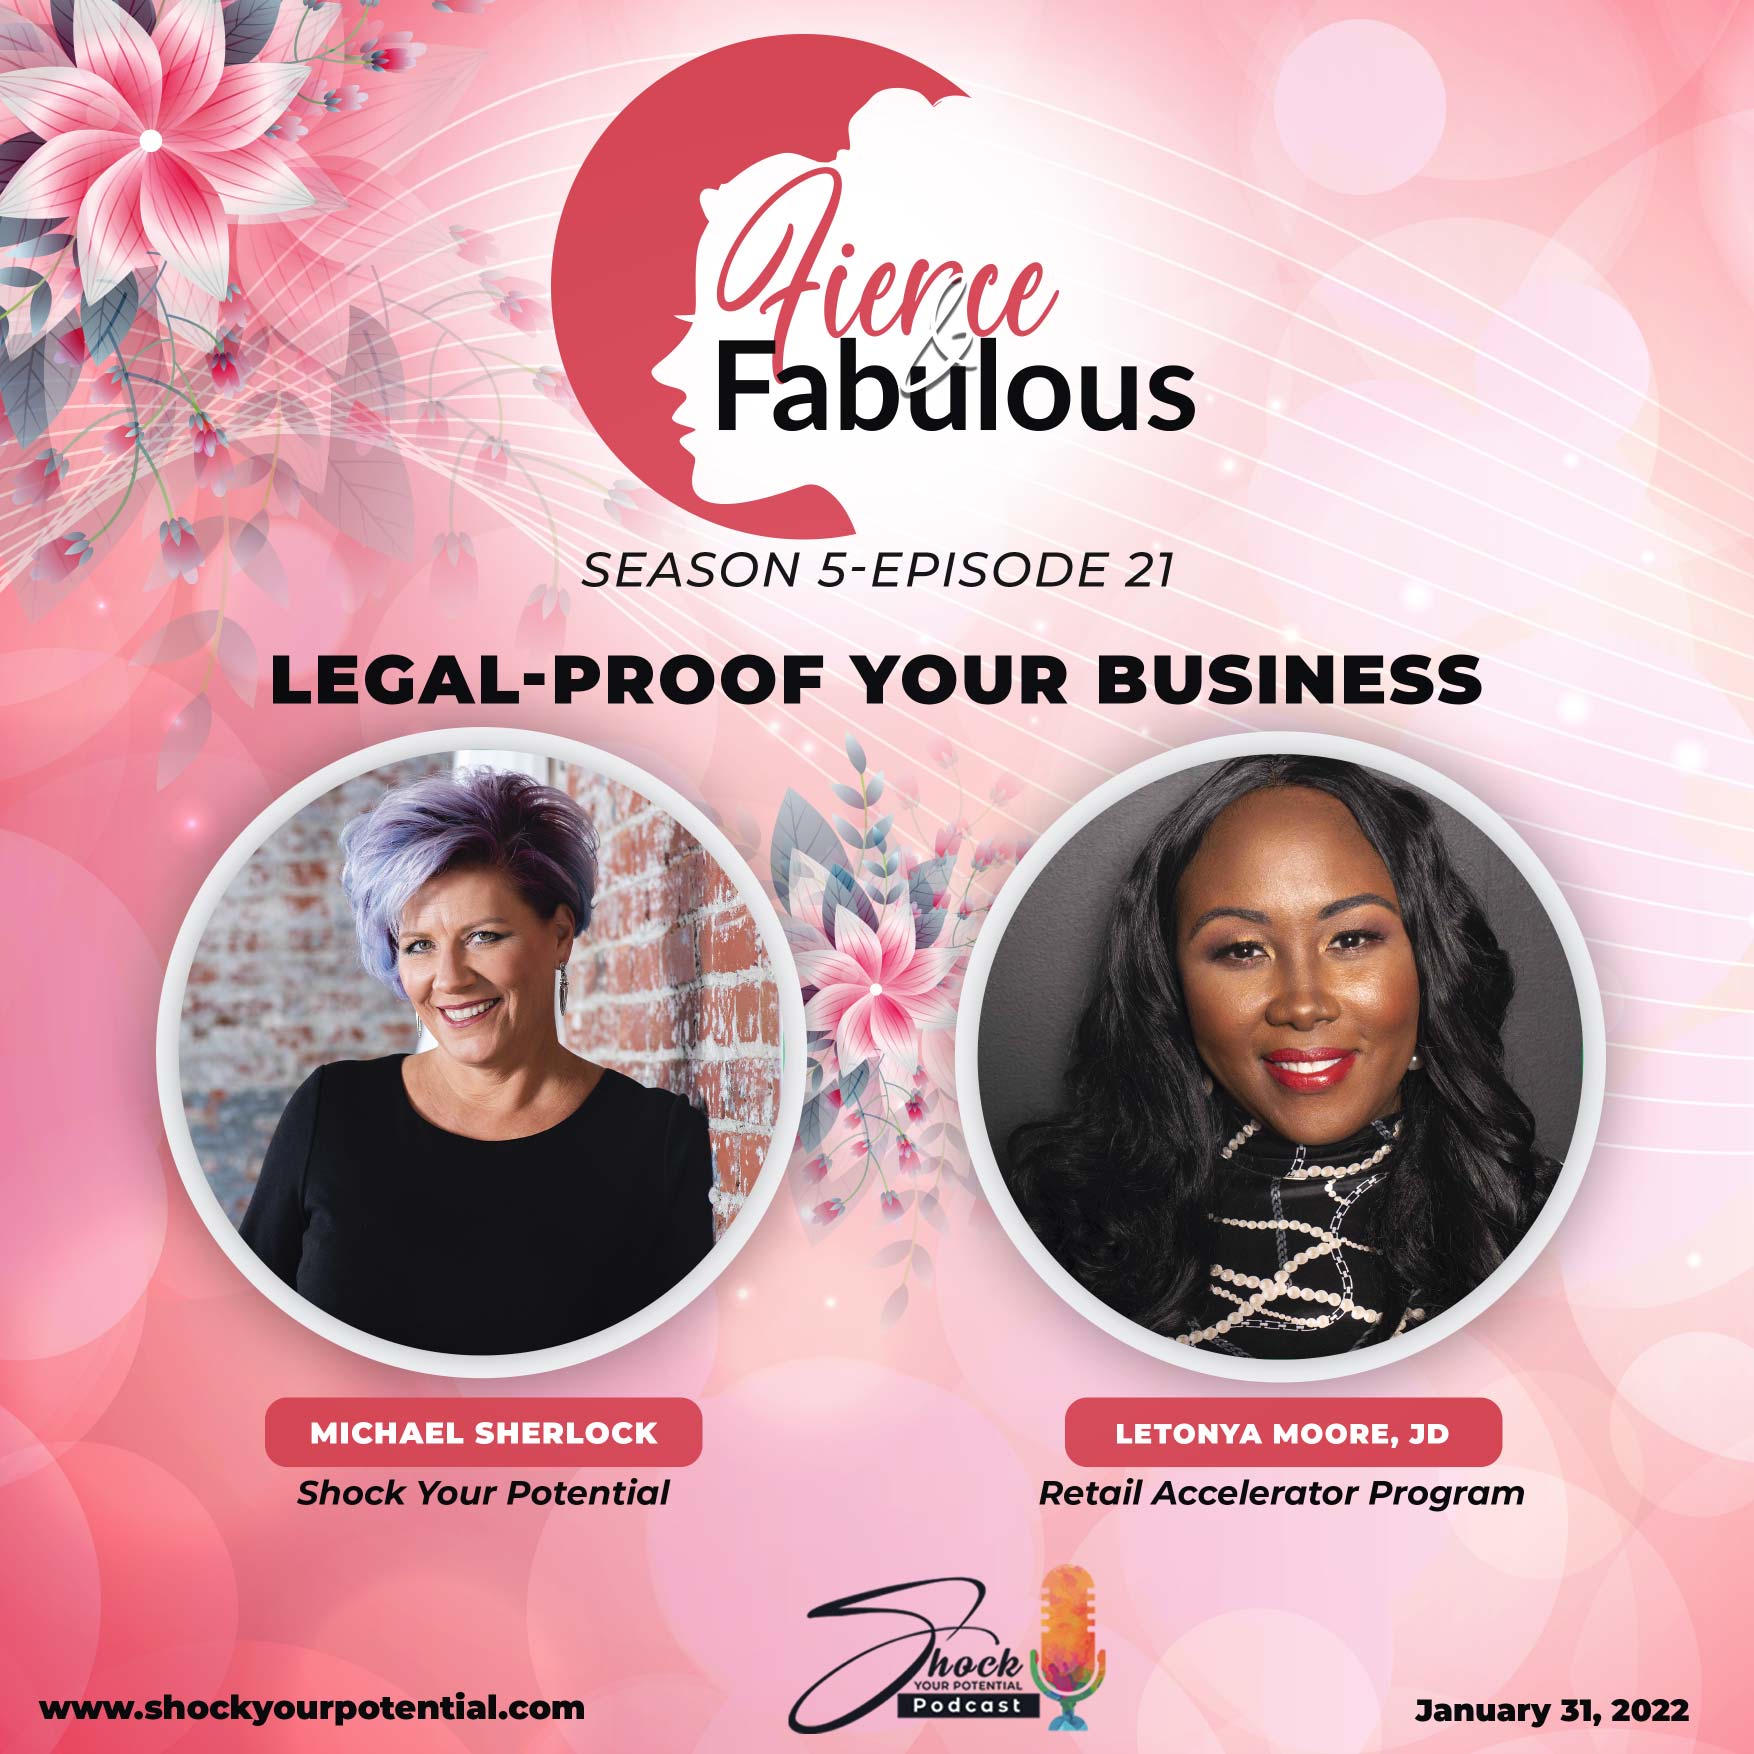 Legal-Proof Your Business – LeTonya Moore